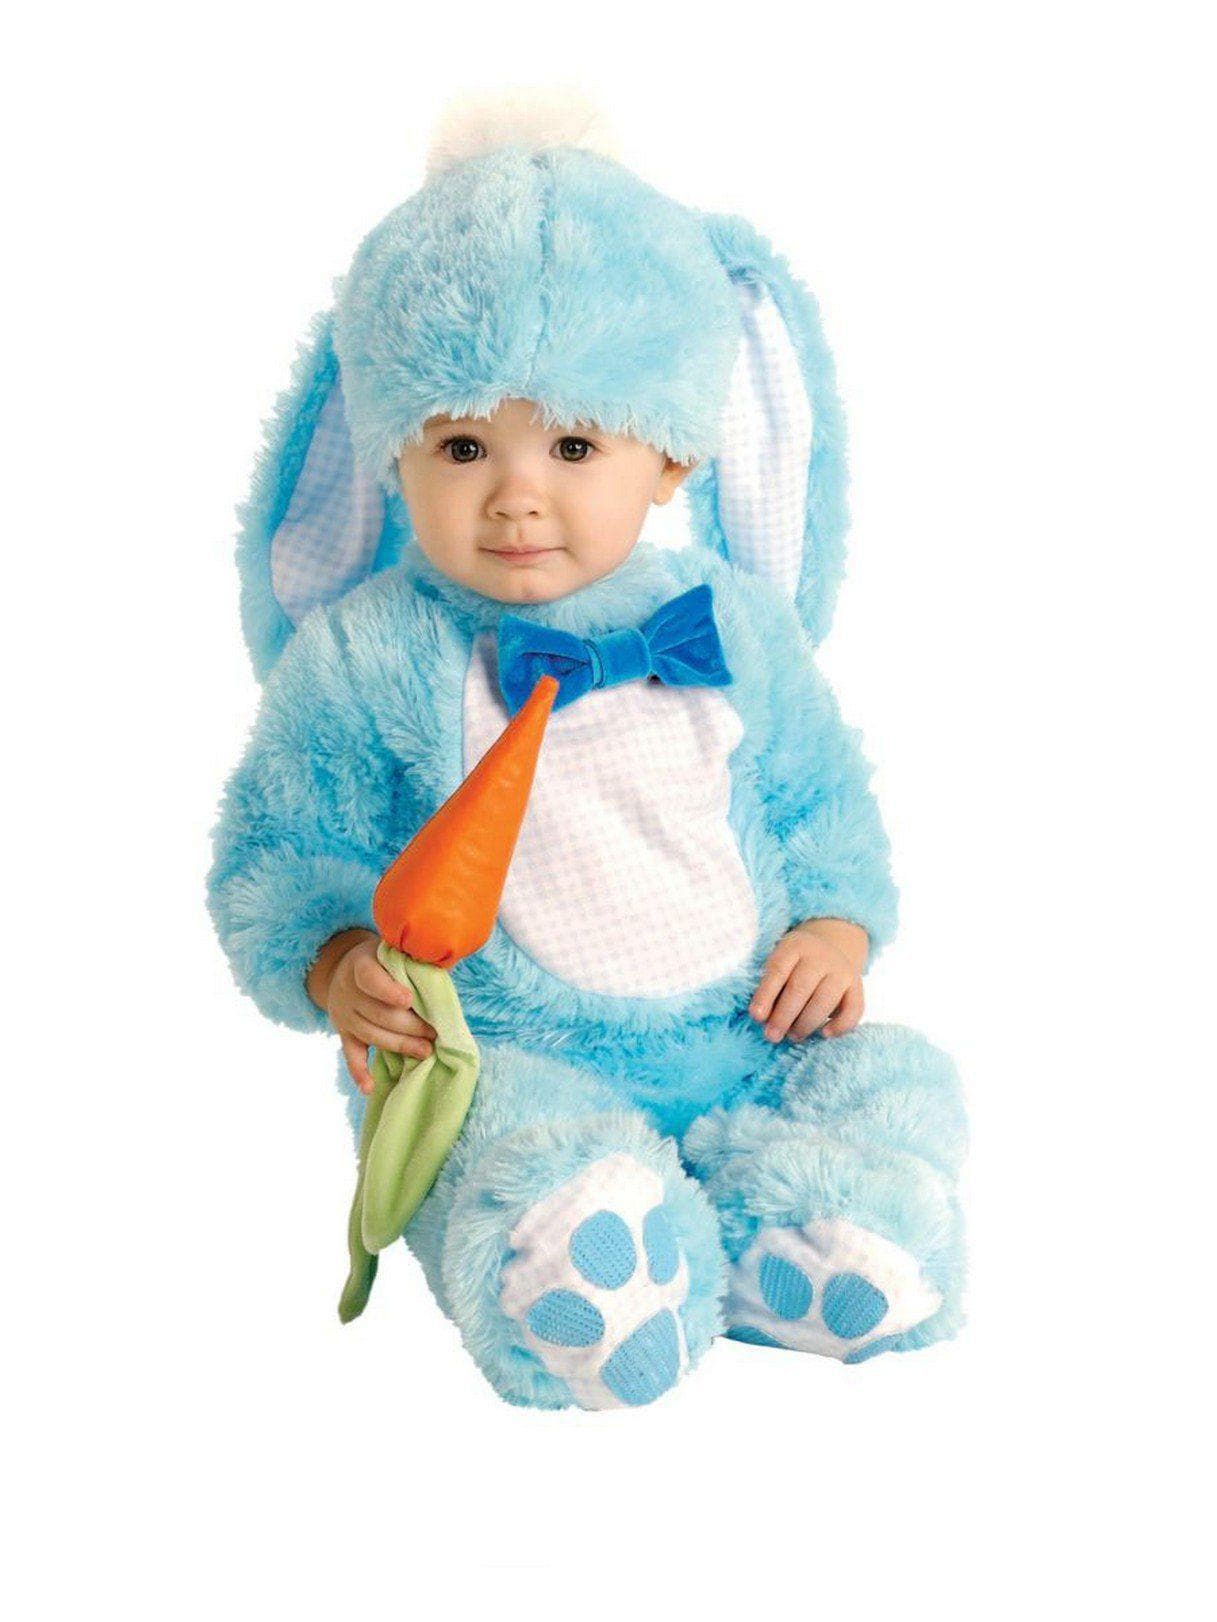 Blue Bunny Costume for Babies - costumes.com